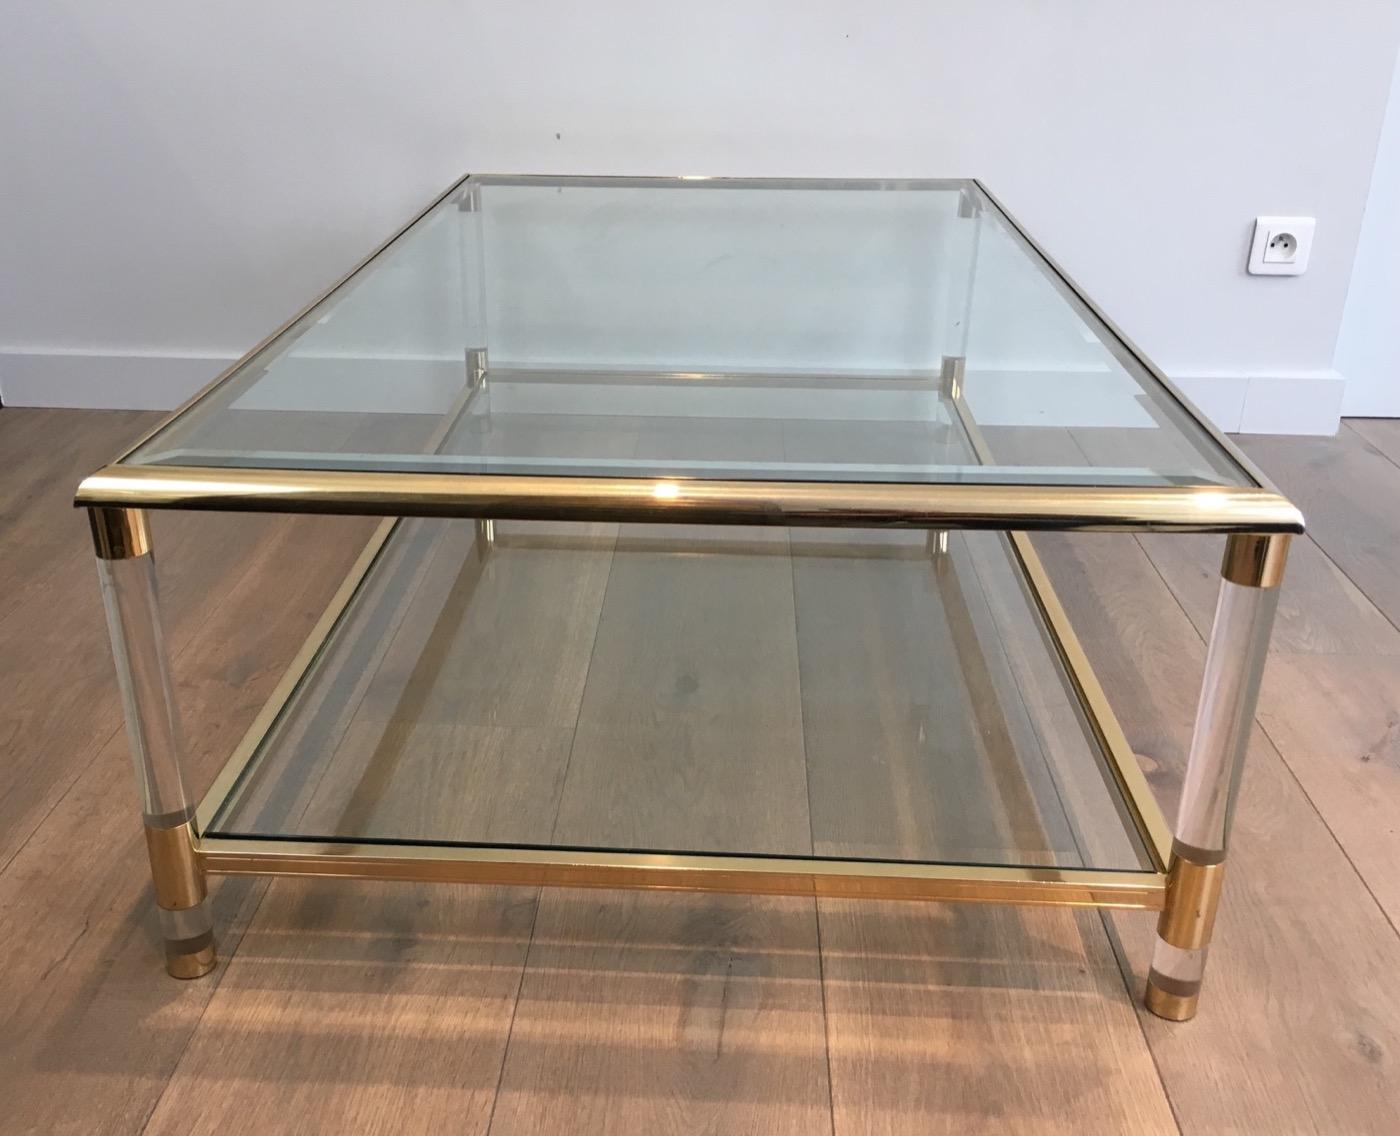 Late 20th Century Large Gild on Nickel and Lucite Coffee Table, French, circa 1970